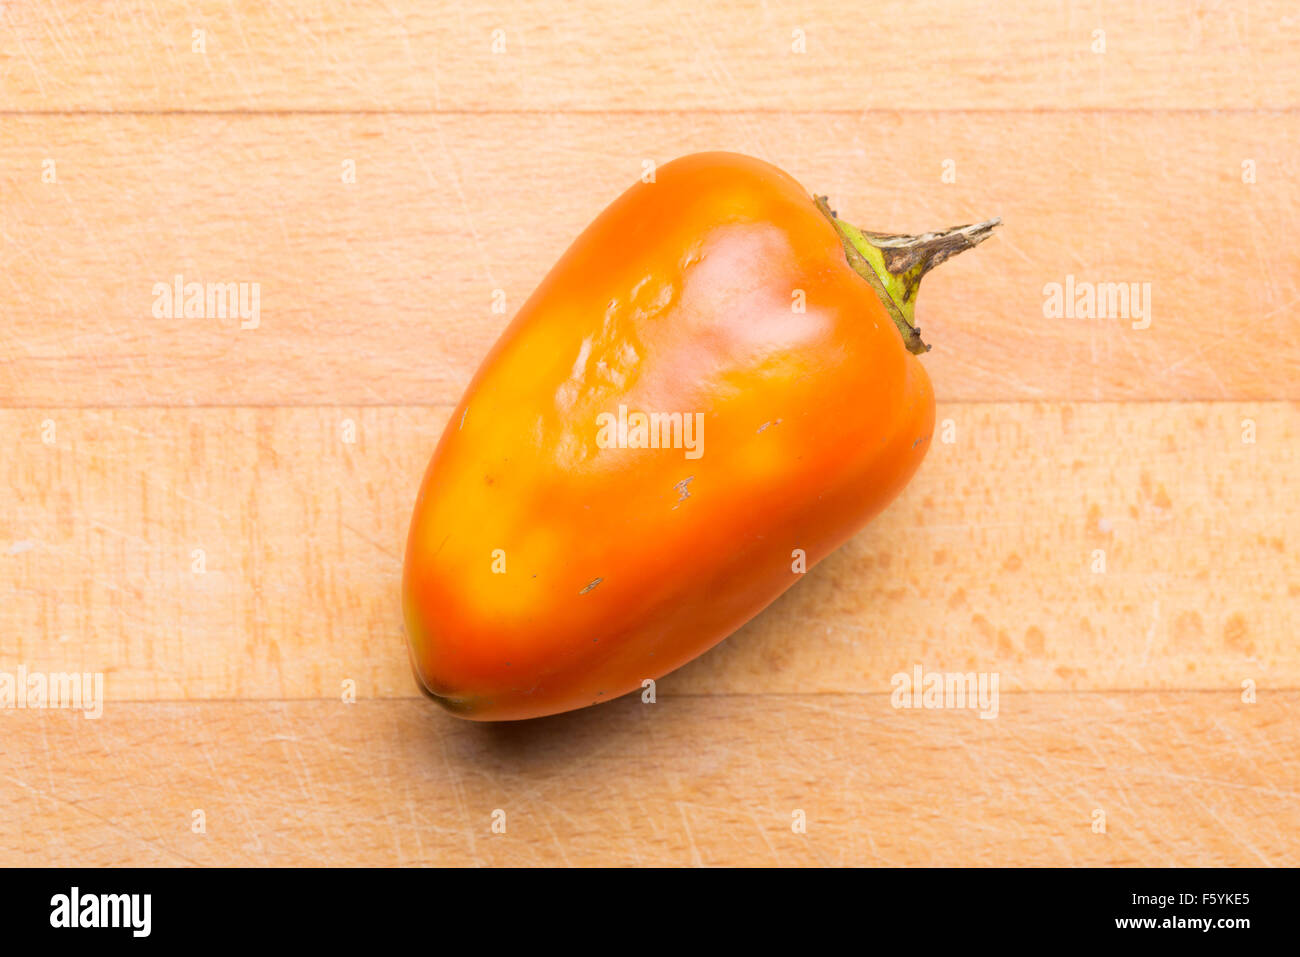 Natural yellow and orange bell pepper from the garden Stock Photo